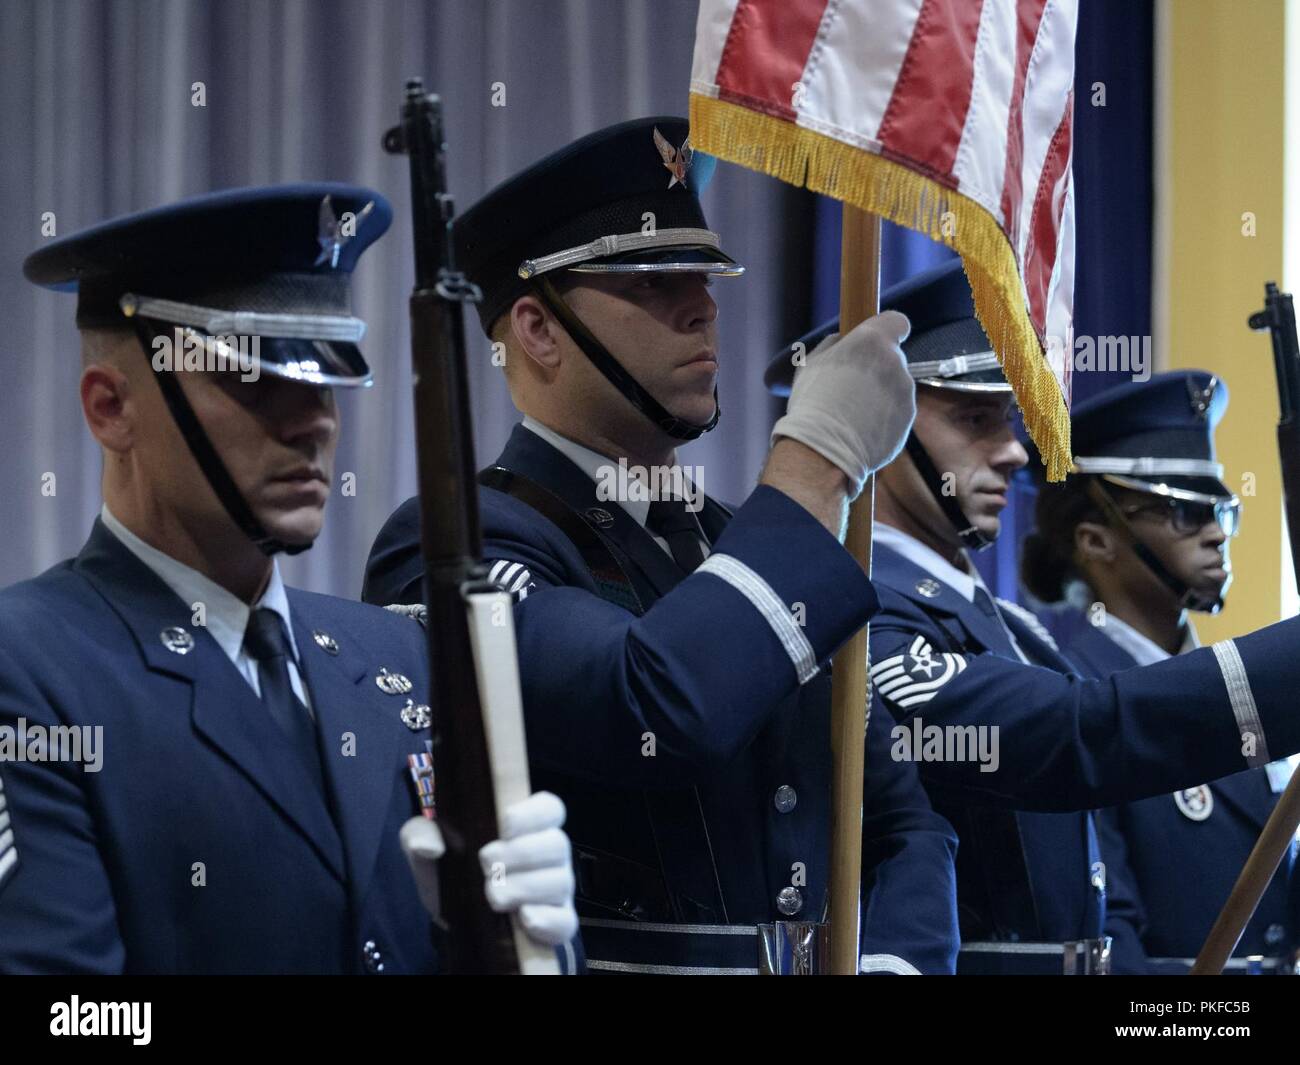 Airmen of the Base Honor Guard present the colors during the promotion ceremony for Col. Eric Laughton, commander of the 107th Medical Group, 107th Attack Wing, New York National Guard, at Niagara Falls Air Reserve Station, N.Y., Aug. 11, 2018. The ceremony took place during drill weekend and is attended by Airmen, family and friends. Stock Photo